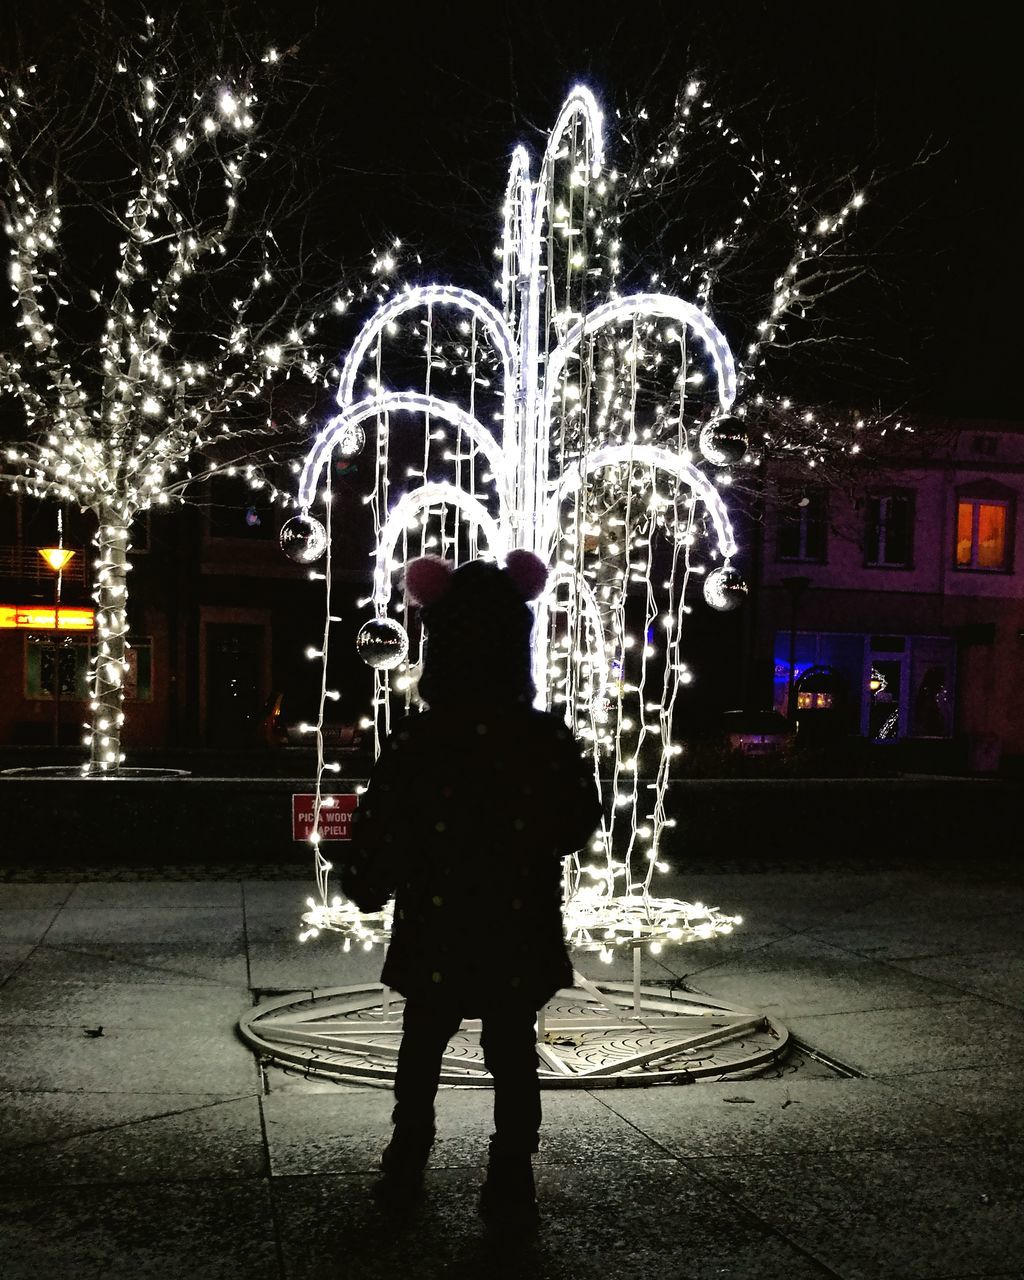 night, illuminated, real people, building exterior, one person, architecture, built structure, motion, street, rear view, standing, outdoors, full length, long exposure, lifestyles, tree, city, people